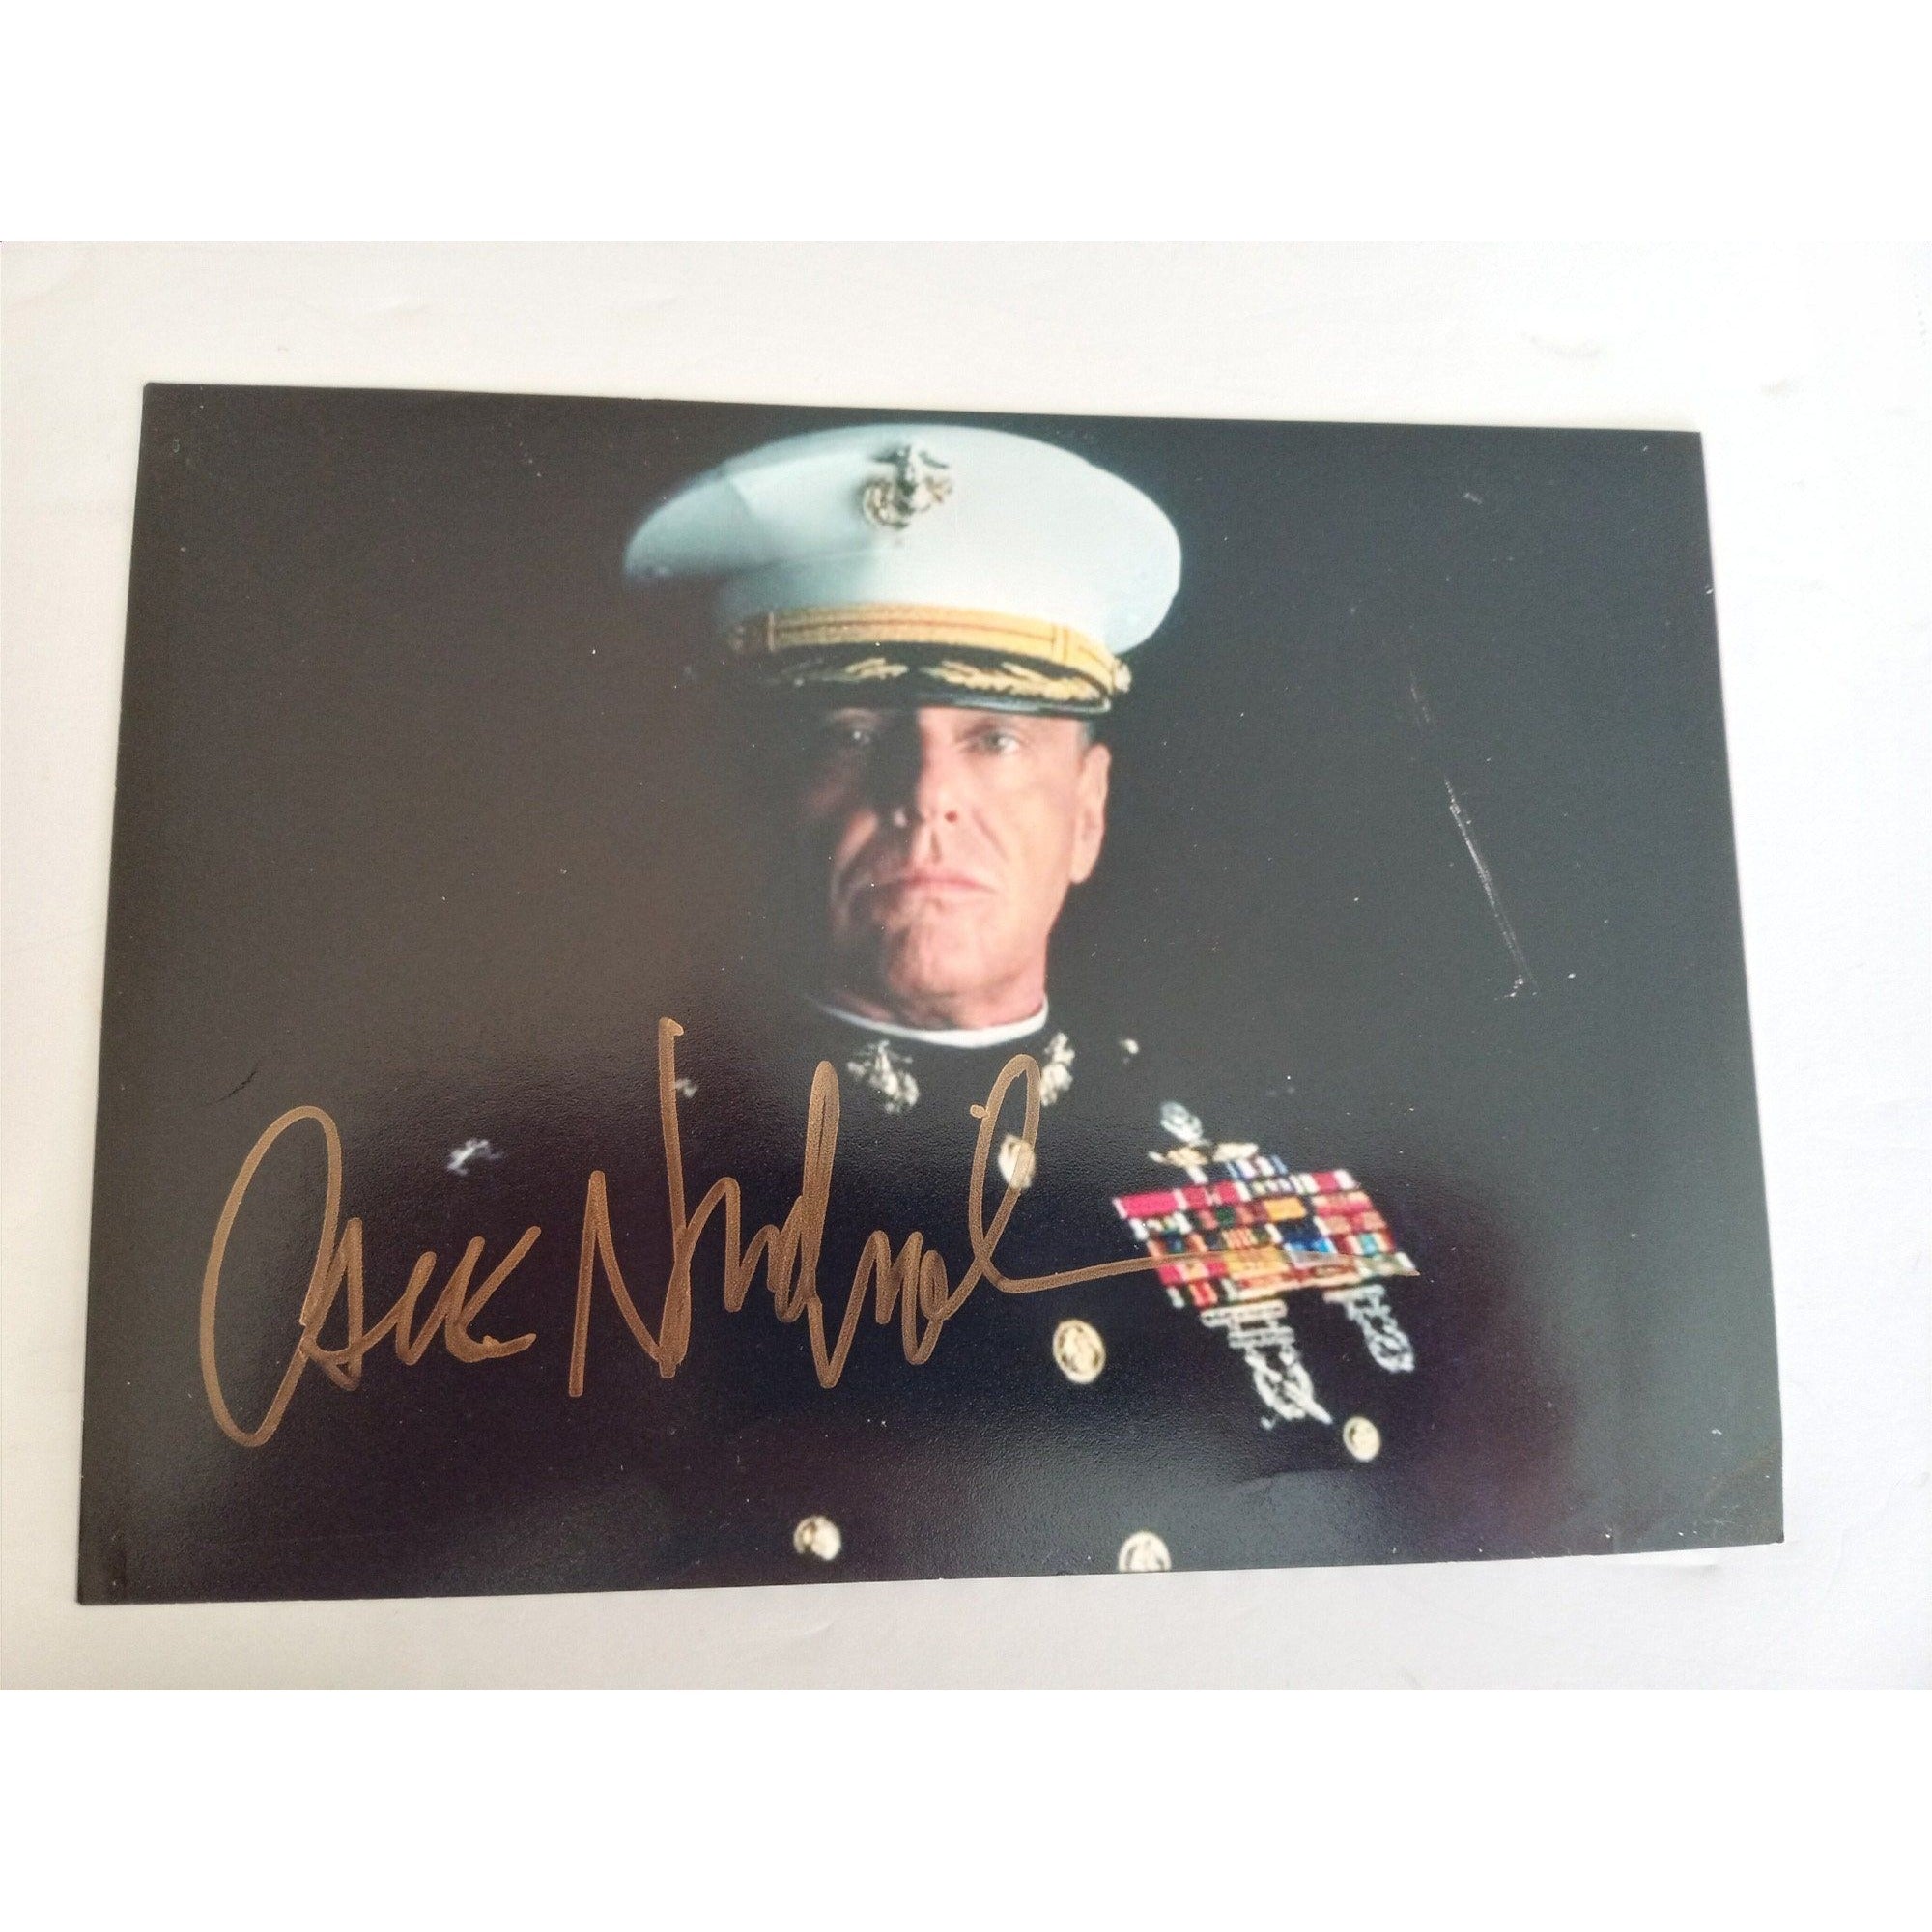 Jack Nicholson "A Few Good Men" 5 x 7 photo signed with proof